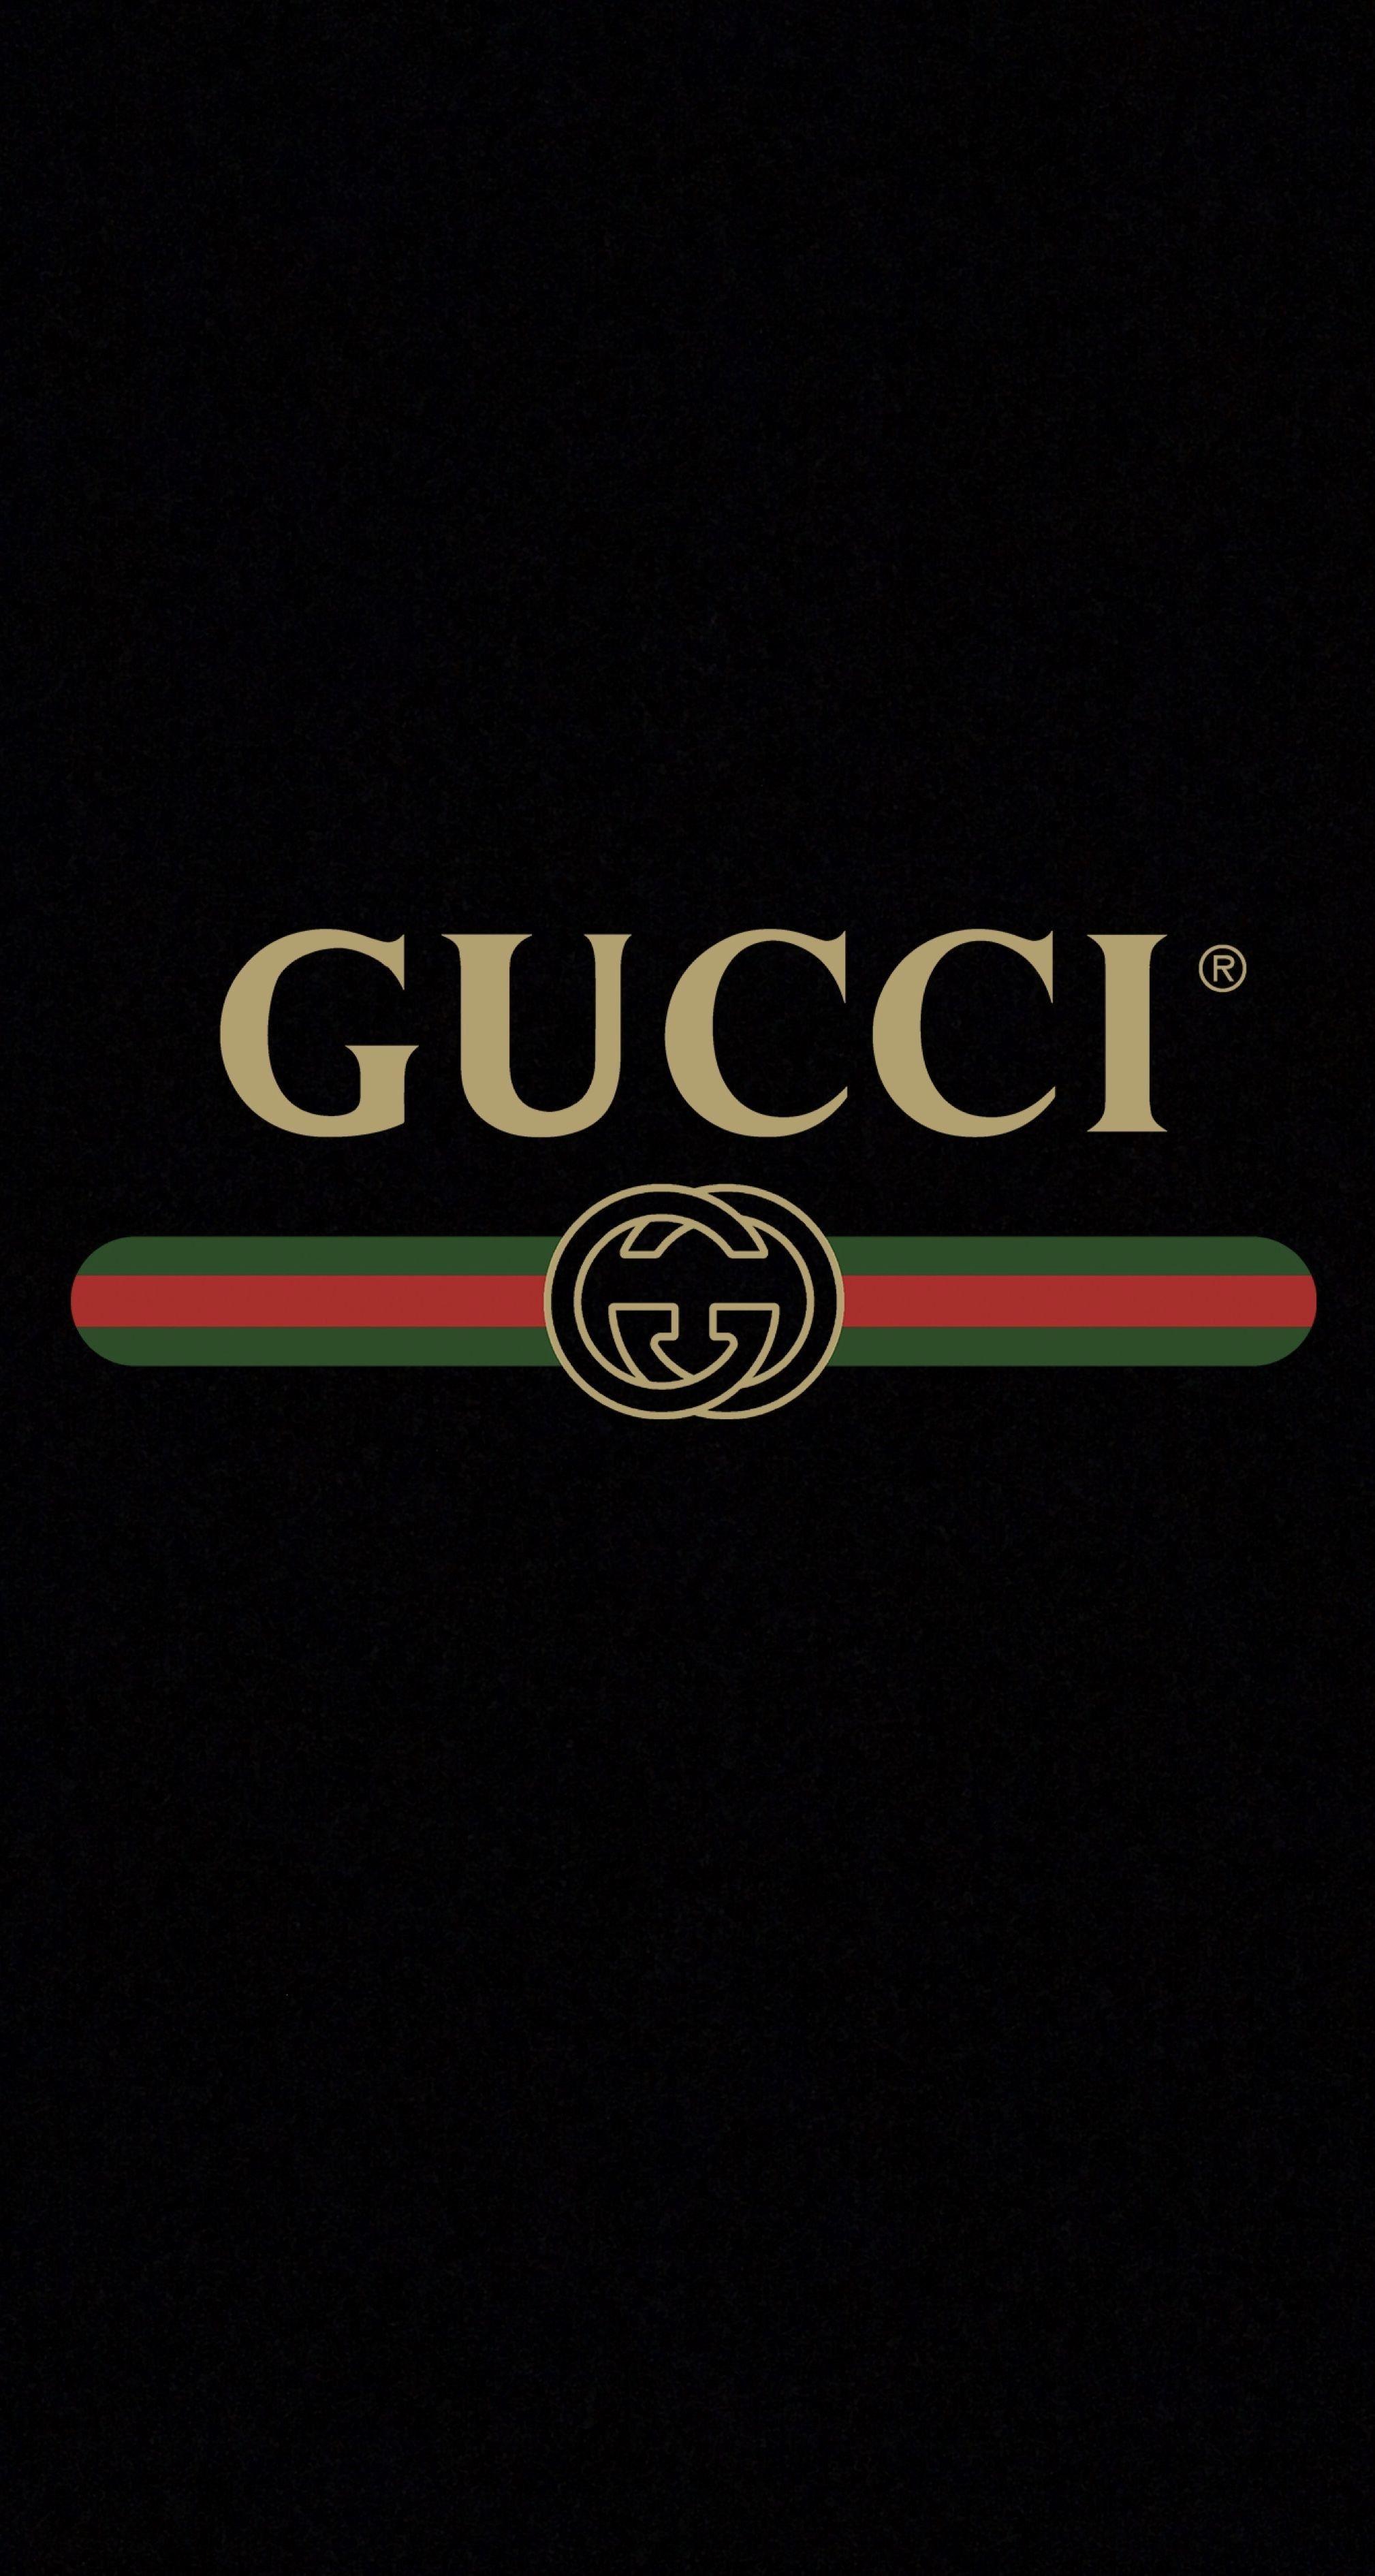 IPhone wallpaper of the gucci logo in gold with a black background - Gucci